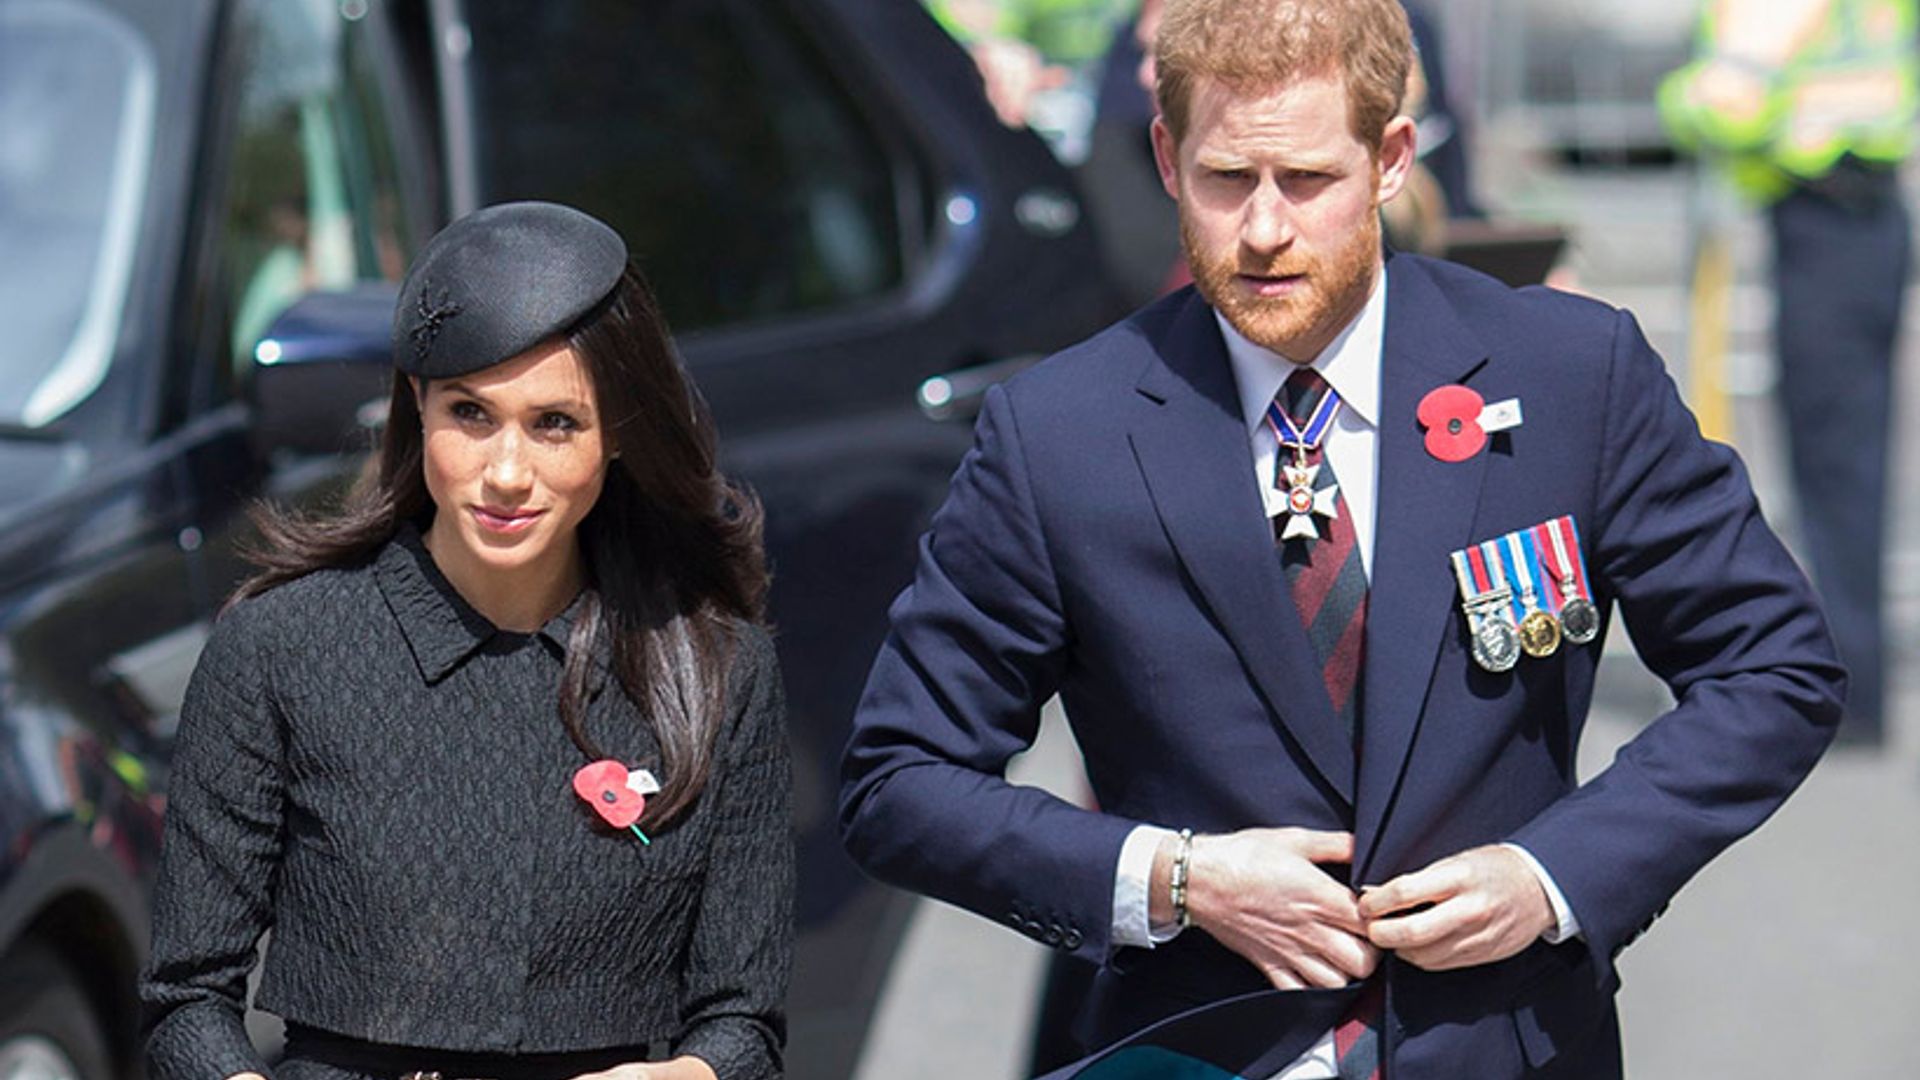 Meghan Markle goes for a power suit as she steps out for ANZAC Day service